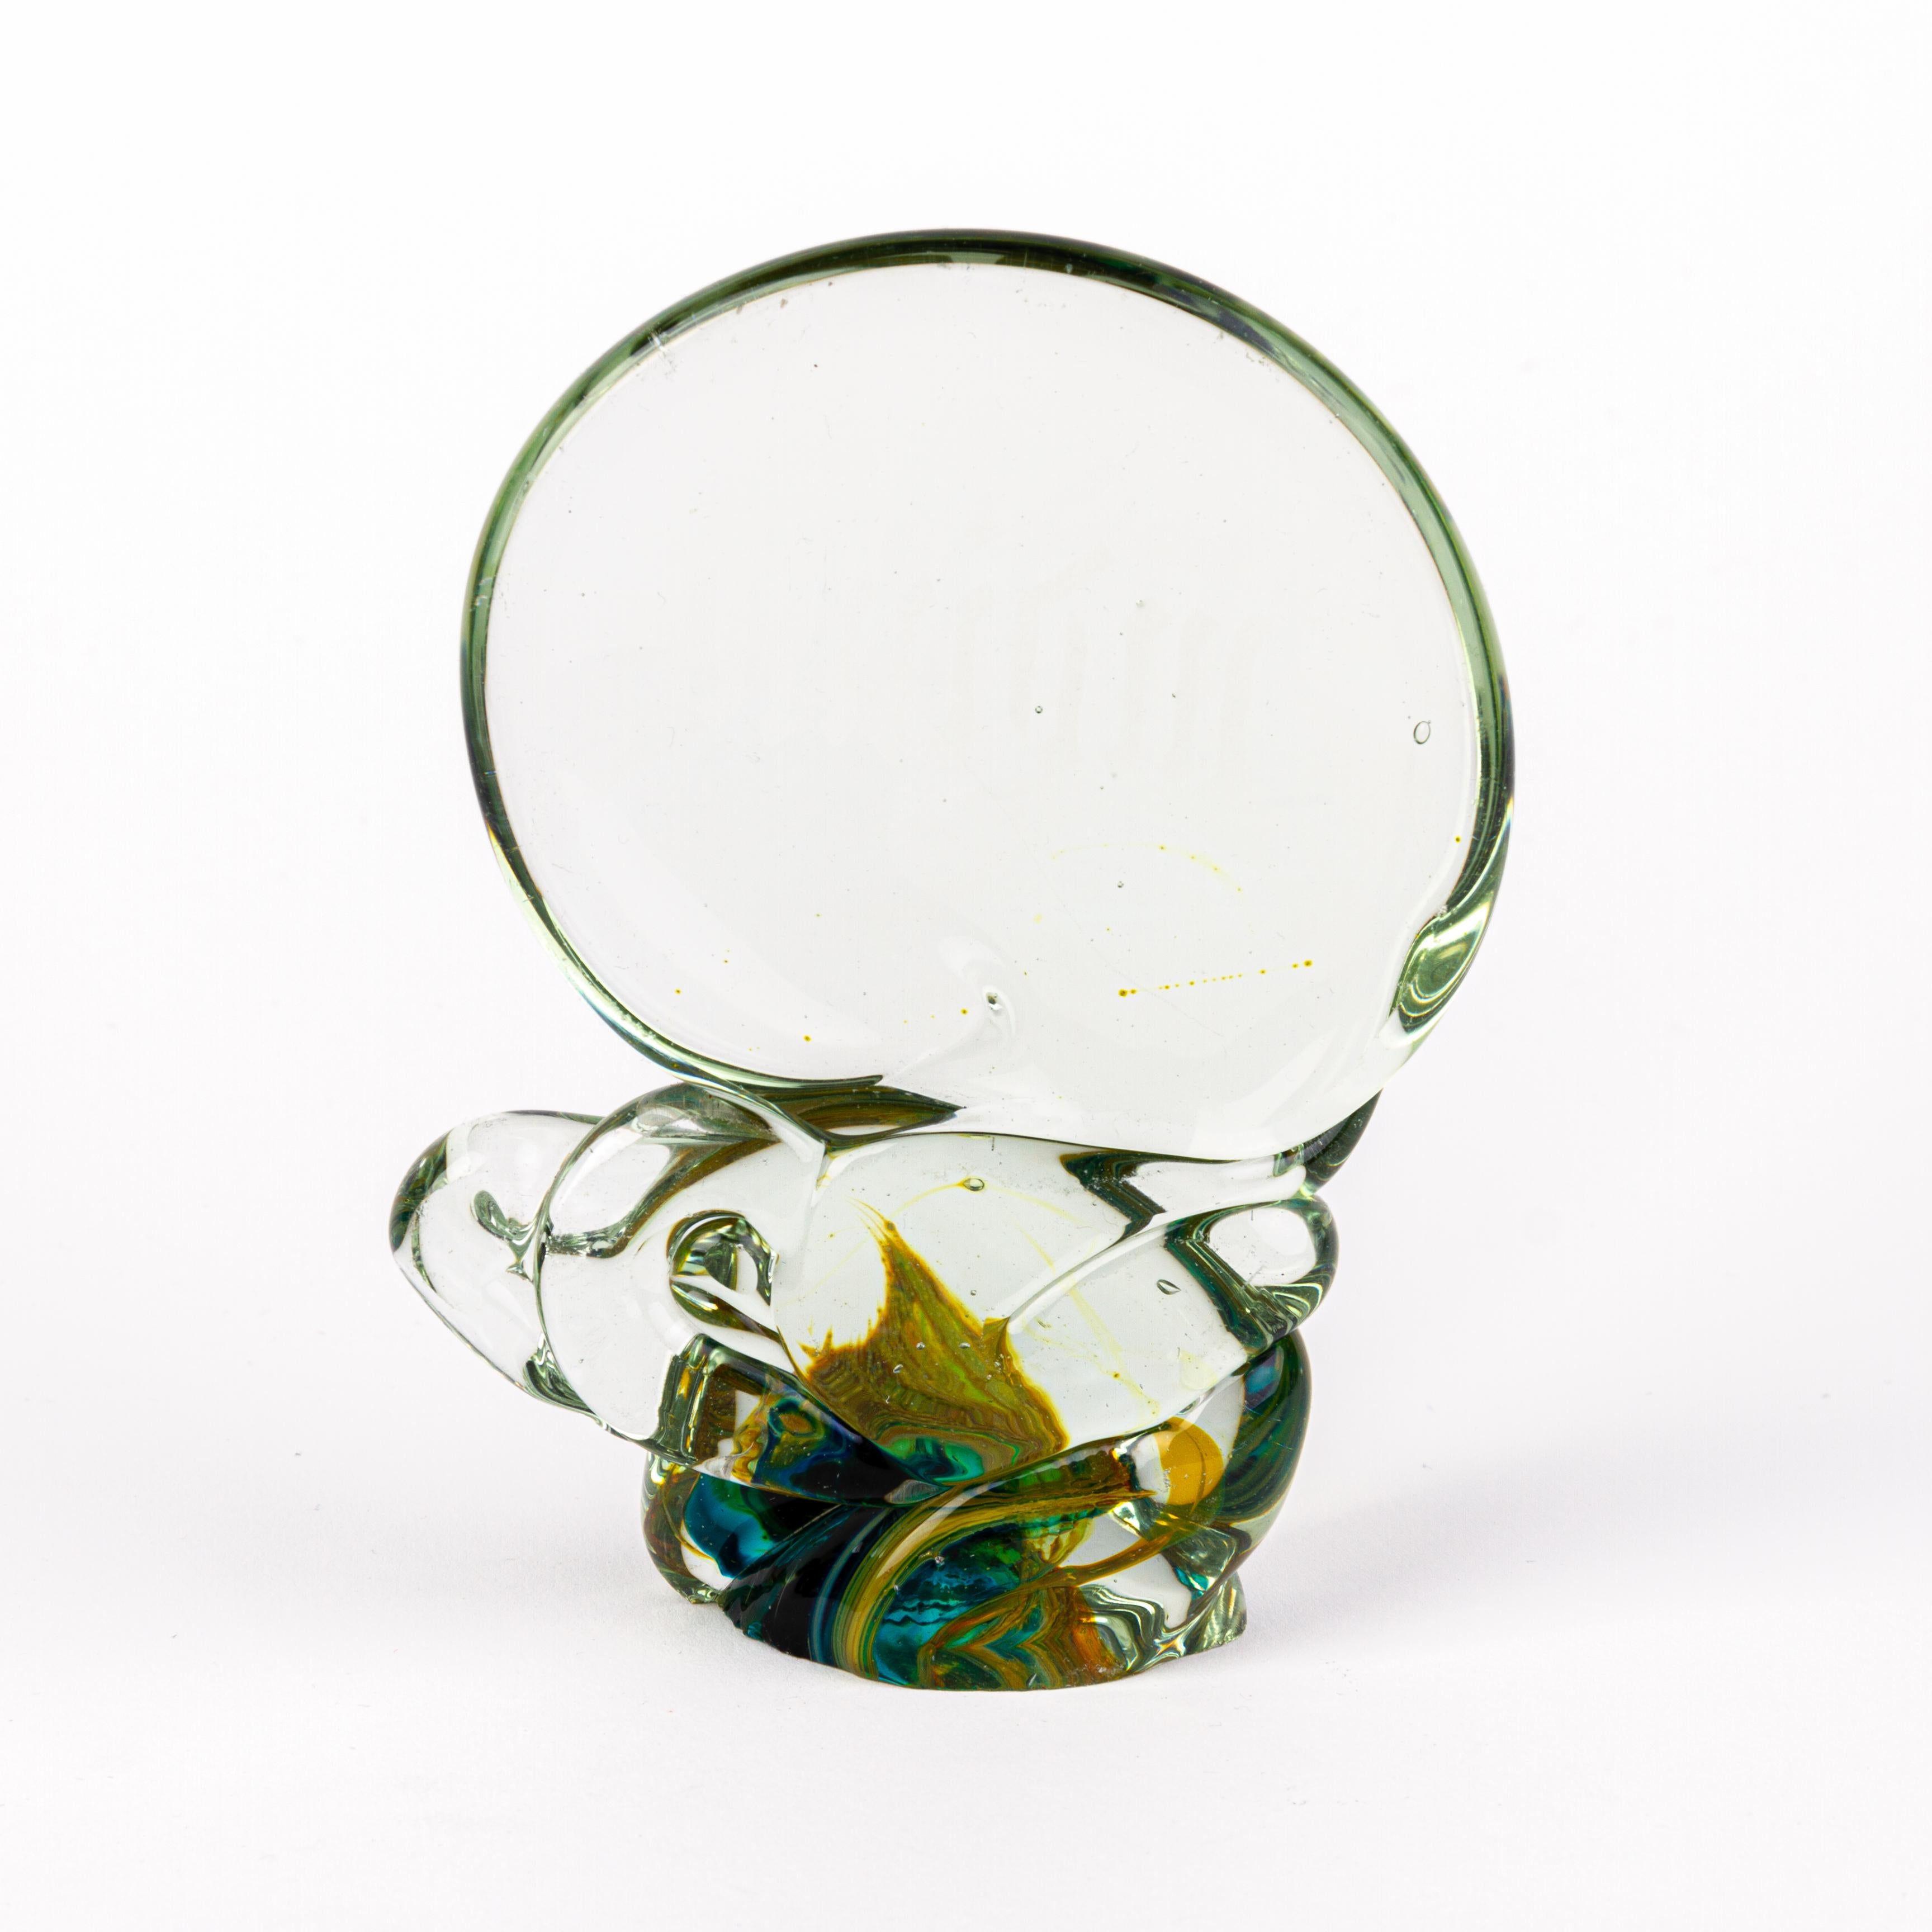 Mdina Maltese Designer Glass Paperweight   In Good Condition For Sale In Nottingham, GB